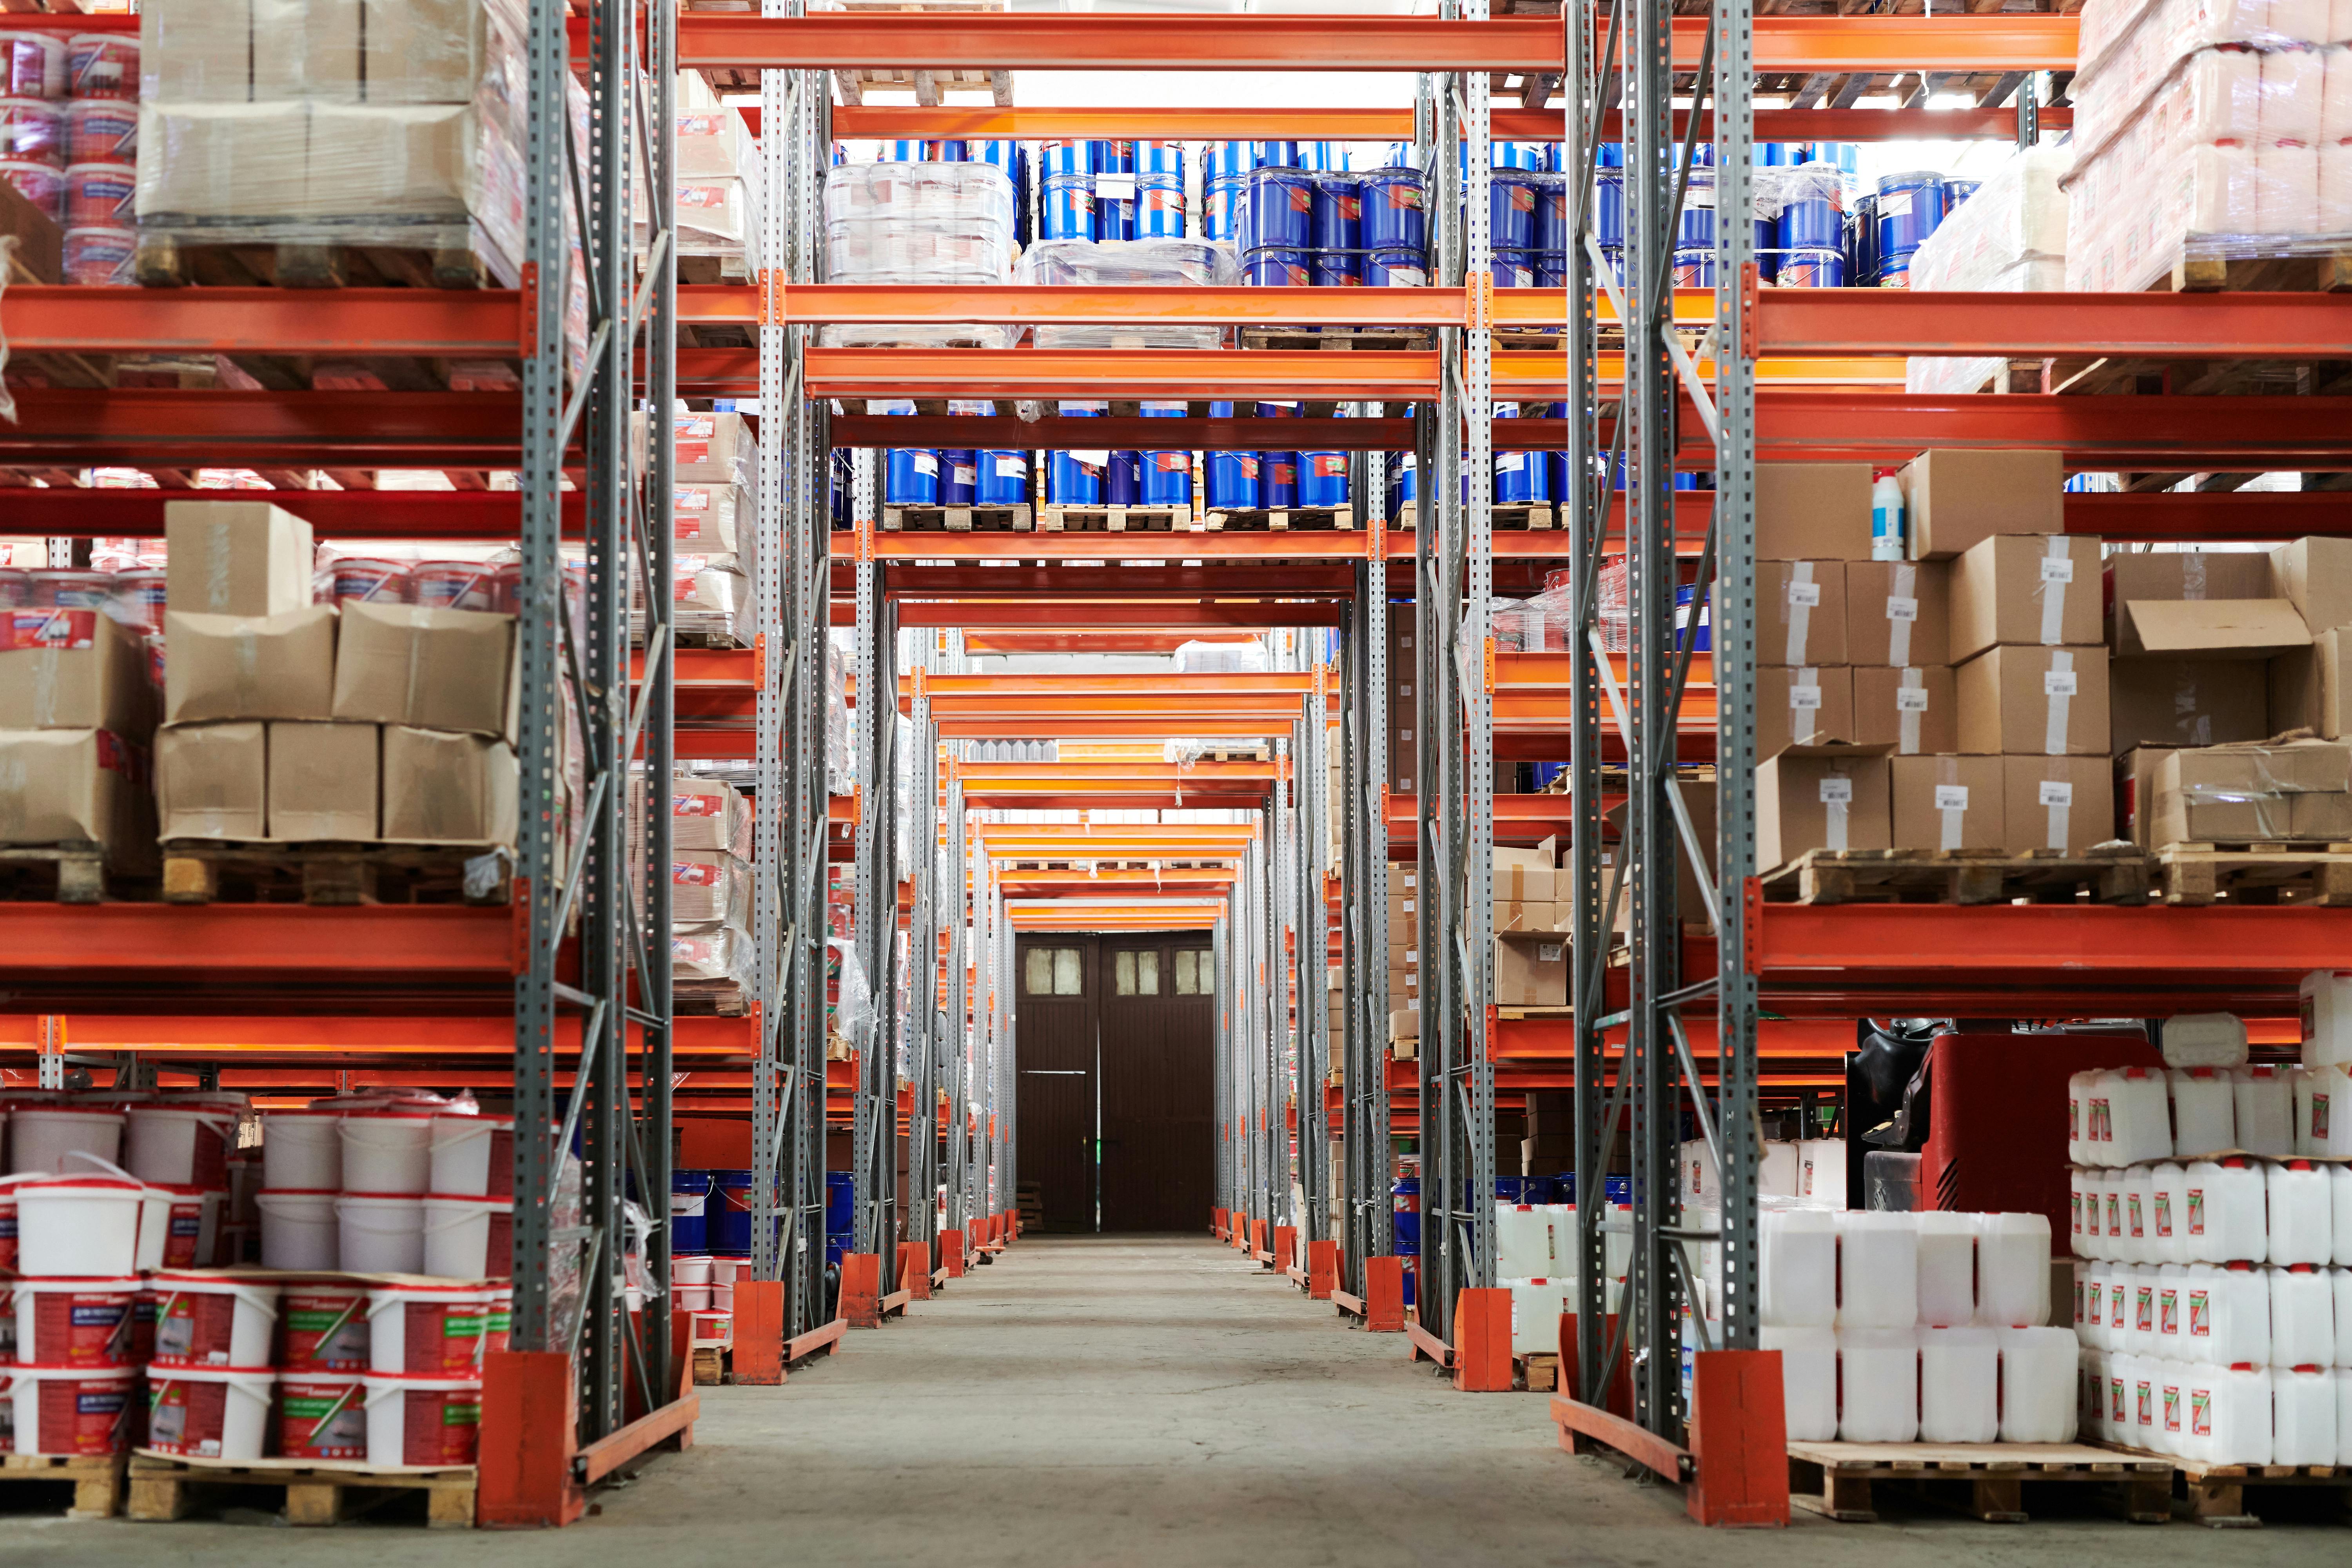 An image of the inside of a warehouse with various orange shelves with cardboard boxes on them. 